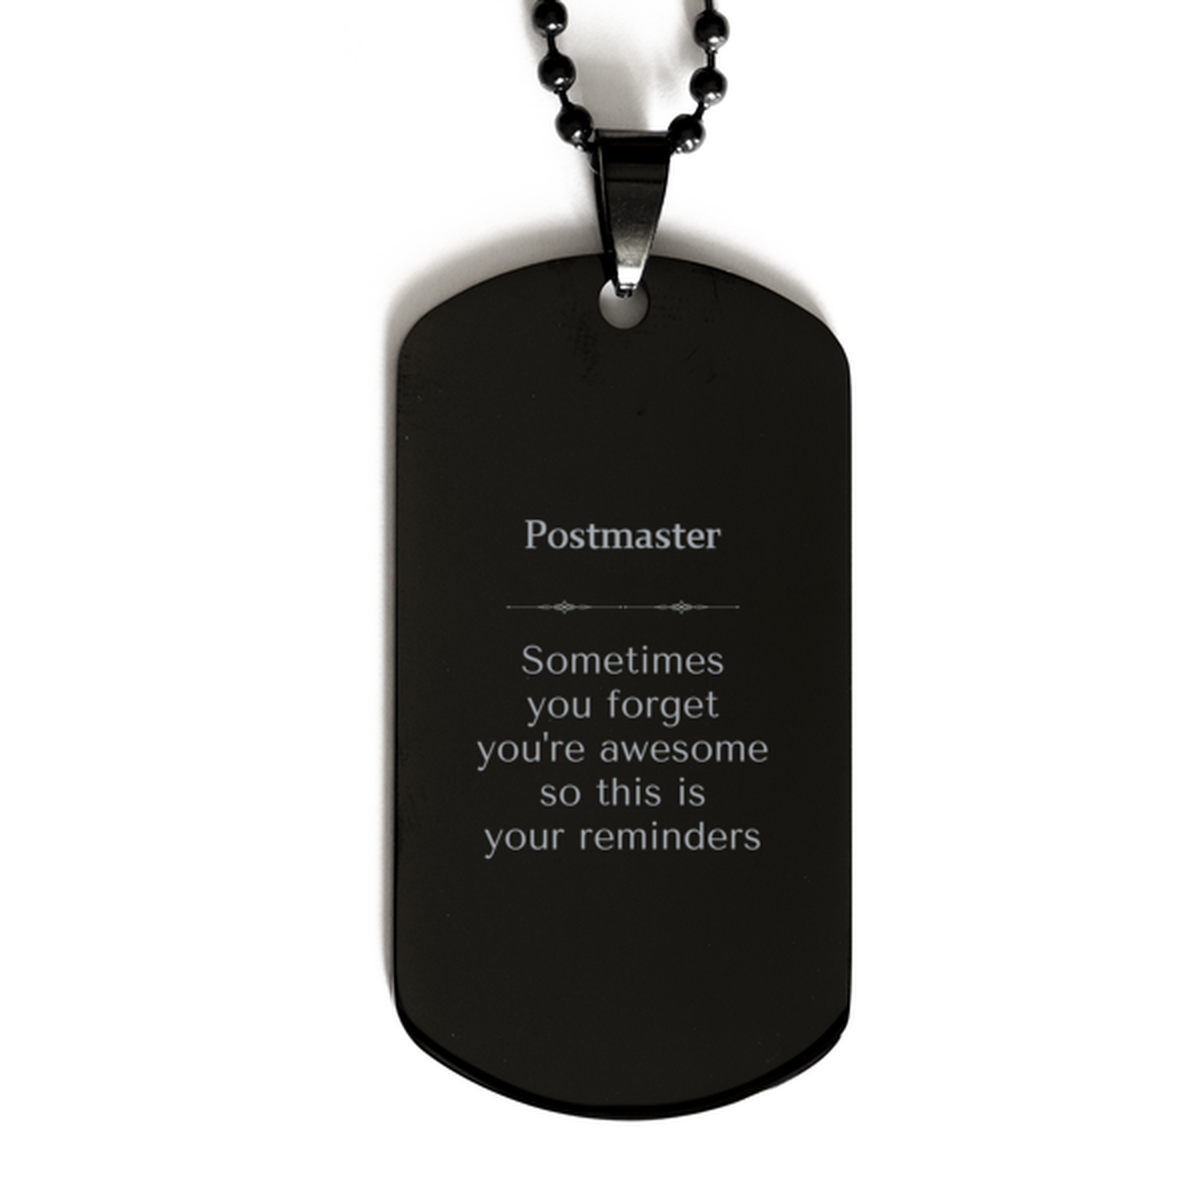 Sentimental Postmaster Black Dog Tag, Postmaster Sometimes you forget you're awesome so this is your reminders, Graduation Christmas Birthday Gifts for Postmaster, Men, Women, Coworkers